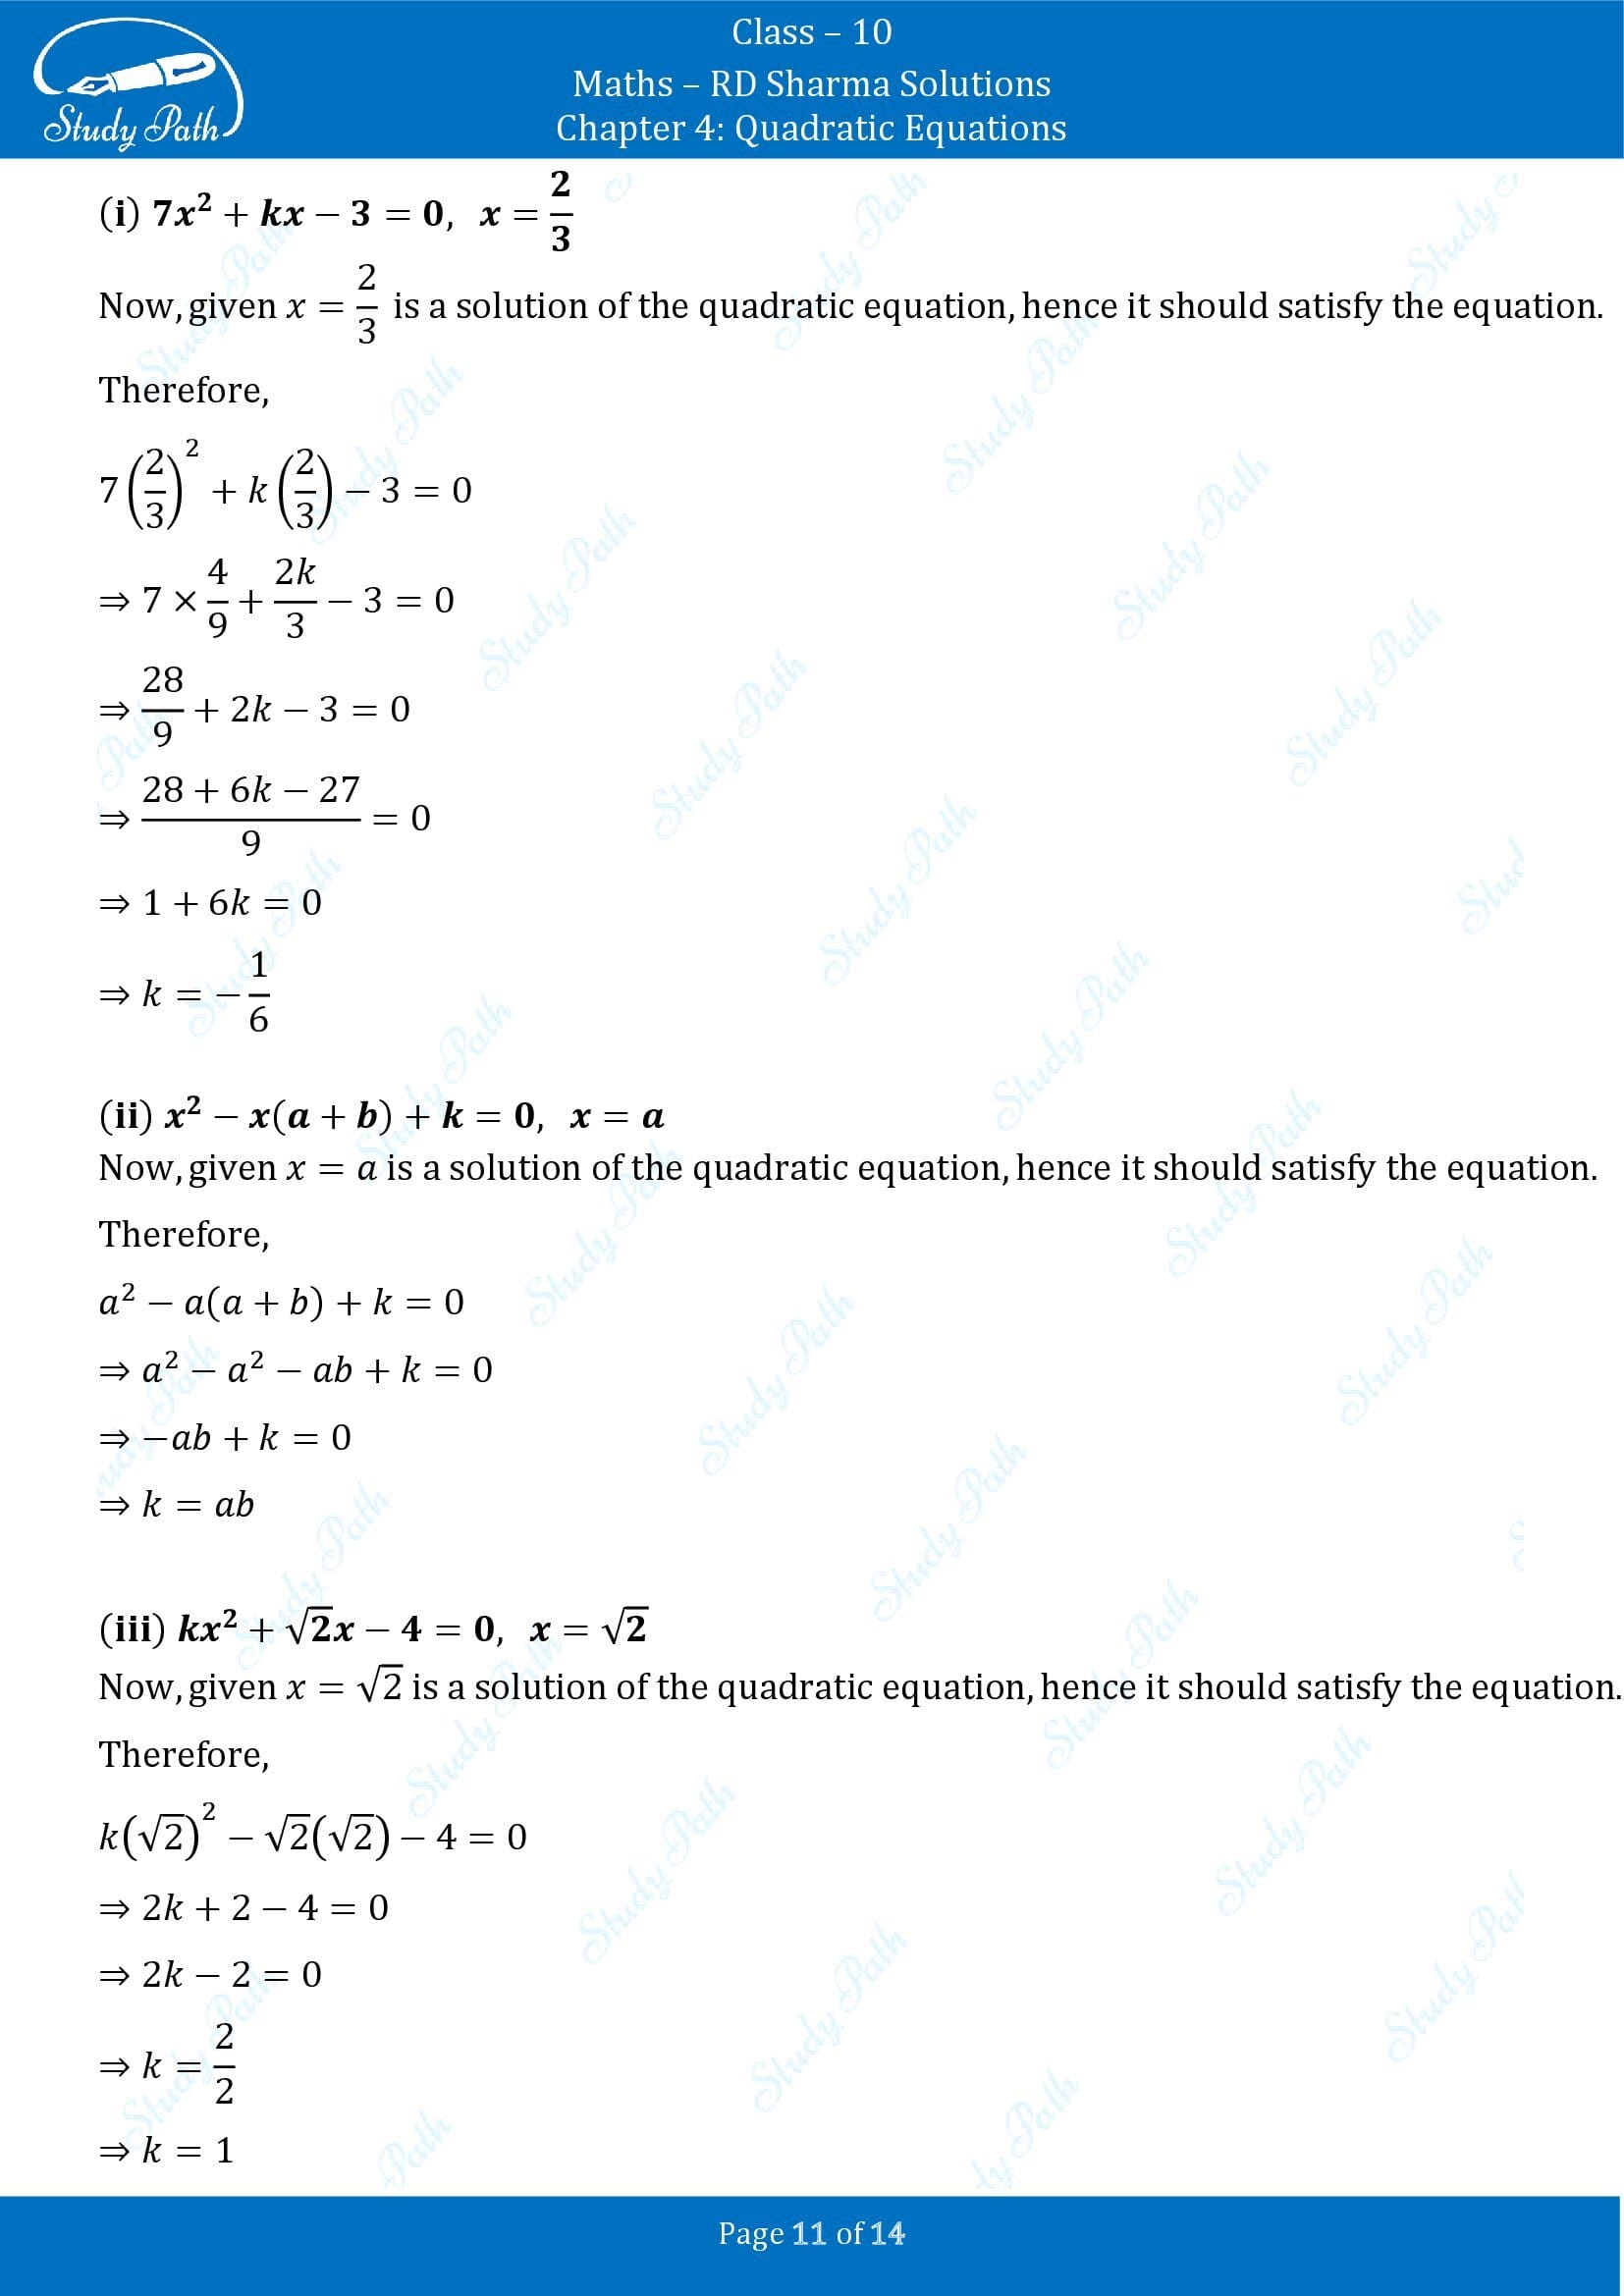 RD Sharma Solutions Class 10 Chapter 4 Quadratic Equations Exercise 4.1 00011